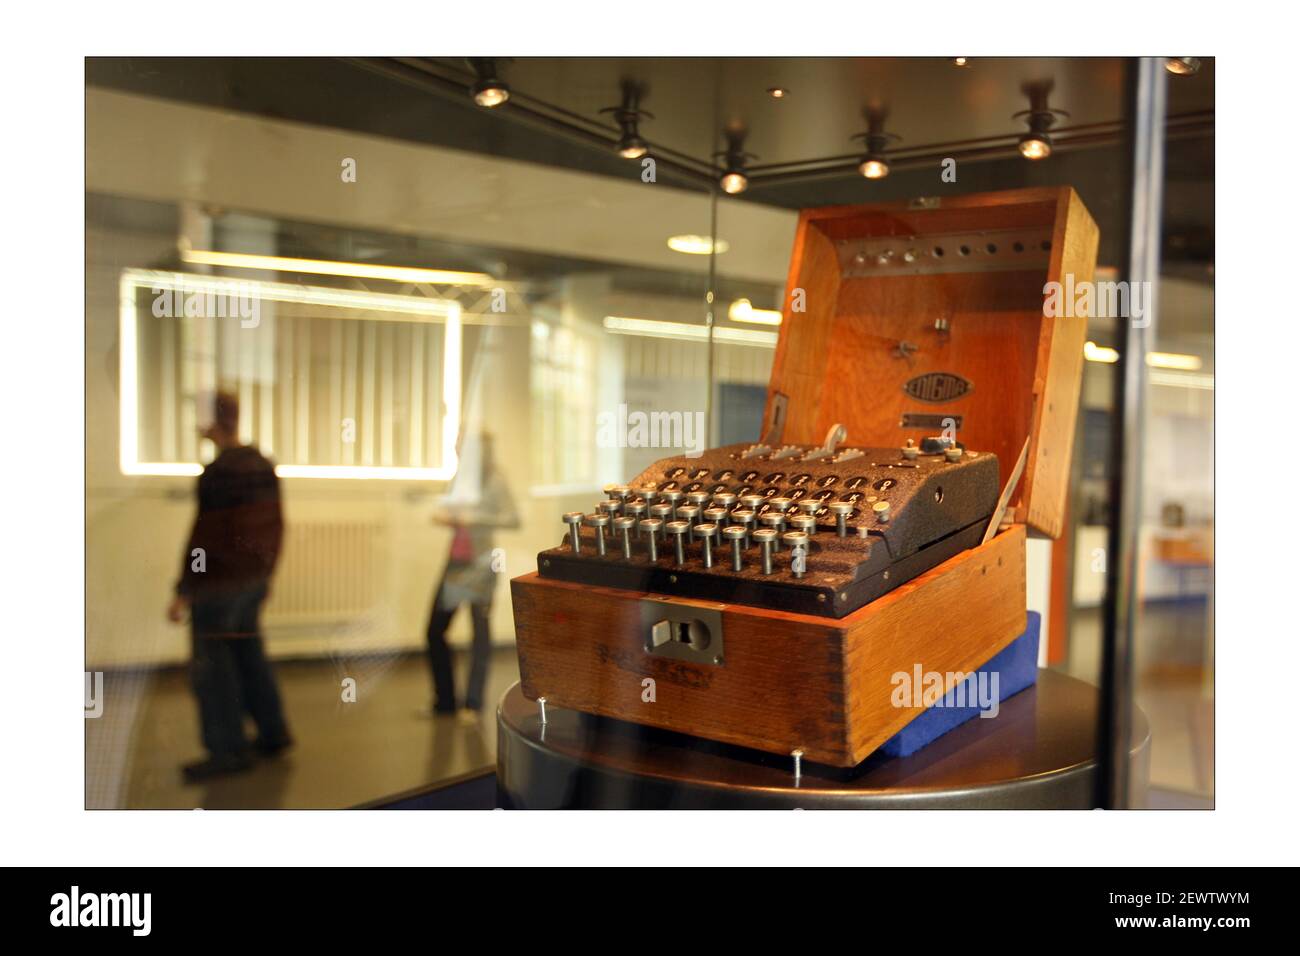 Modified typex machine, a British encryption machine on display in  Bletchley Park, Bletchley. Buckinghamshire, UK Stock Photo - Alamy